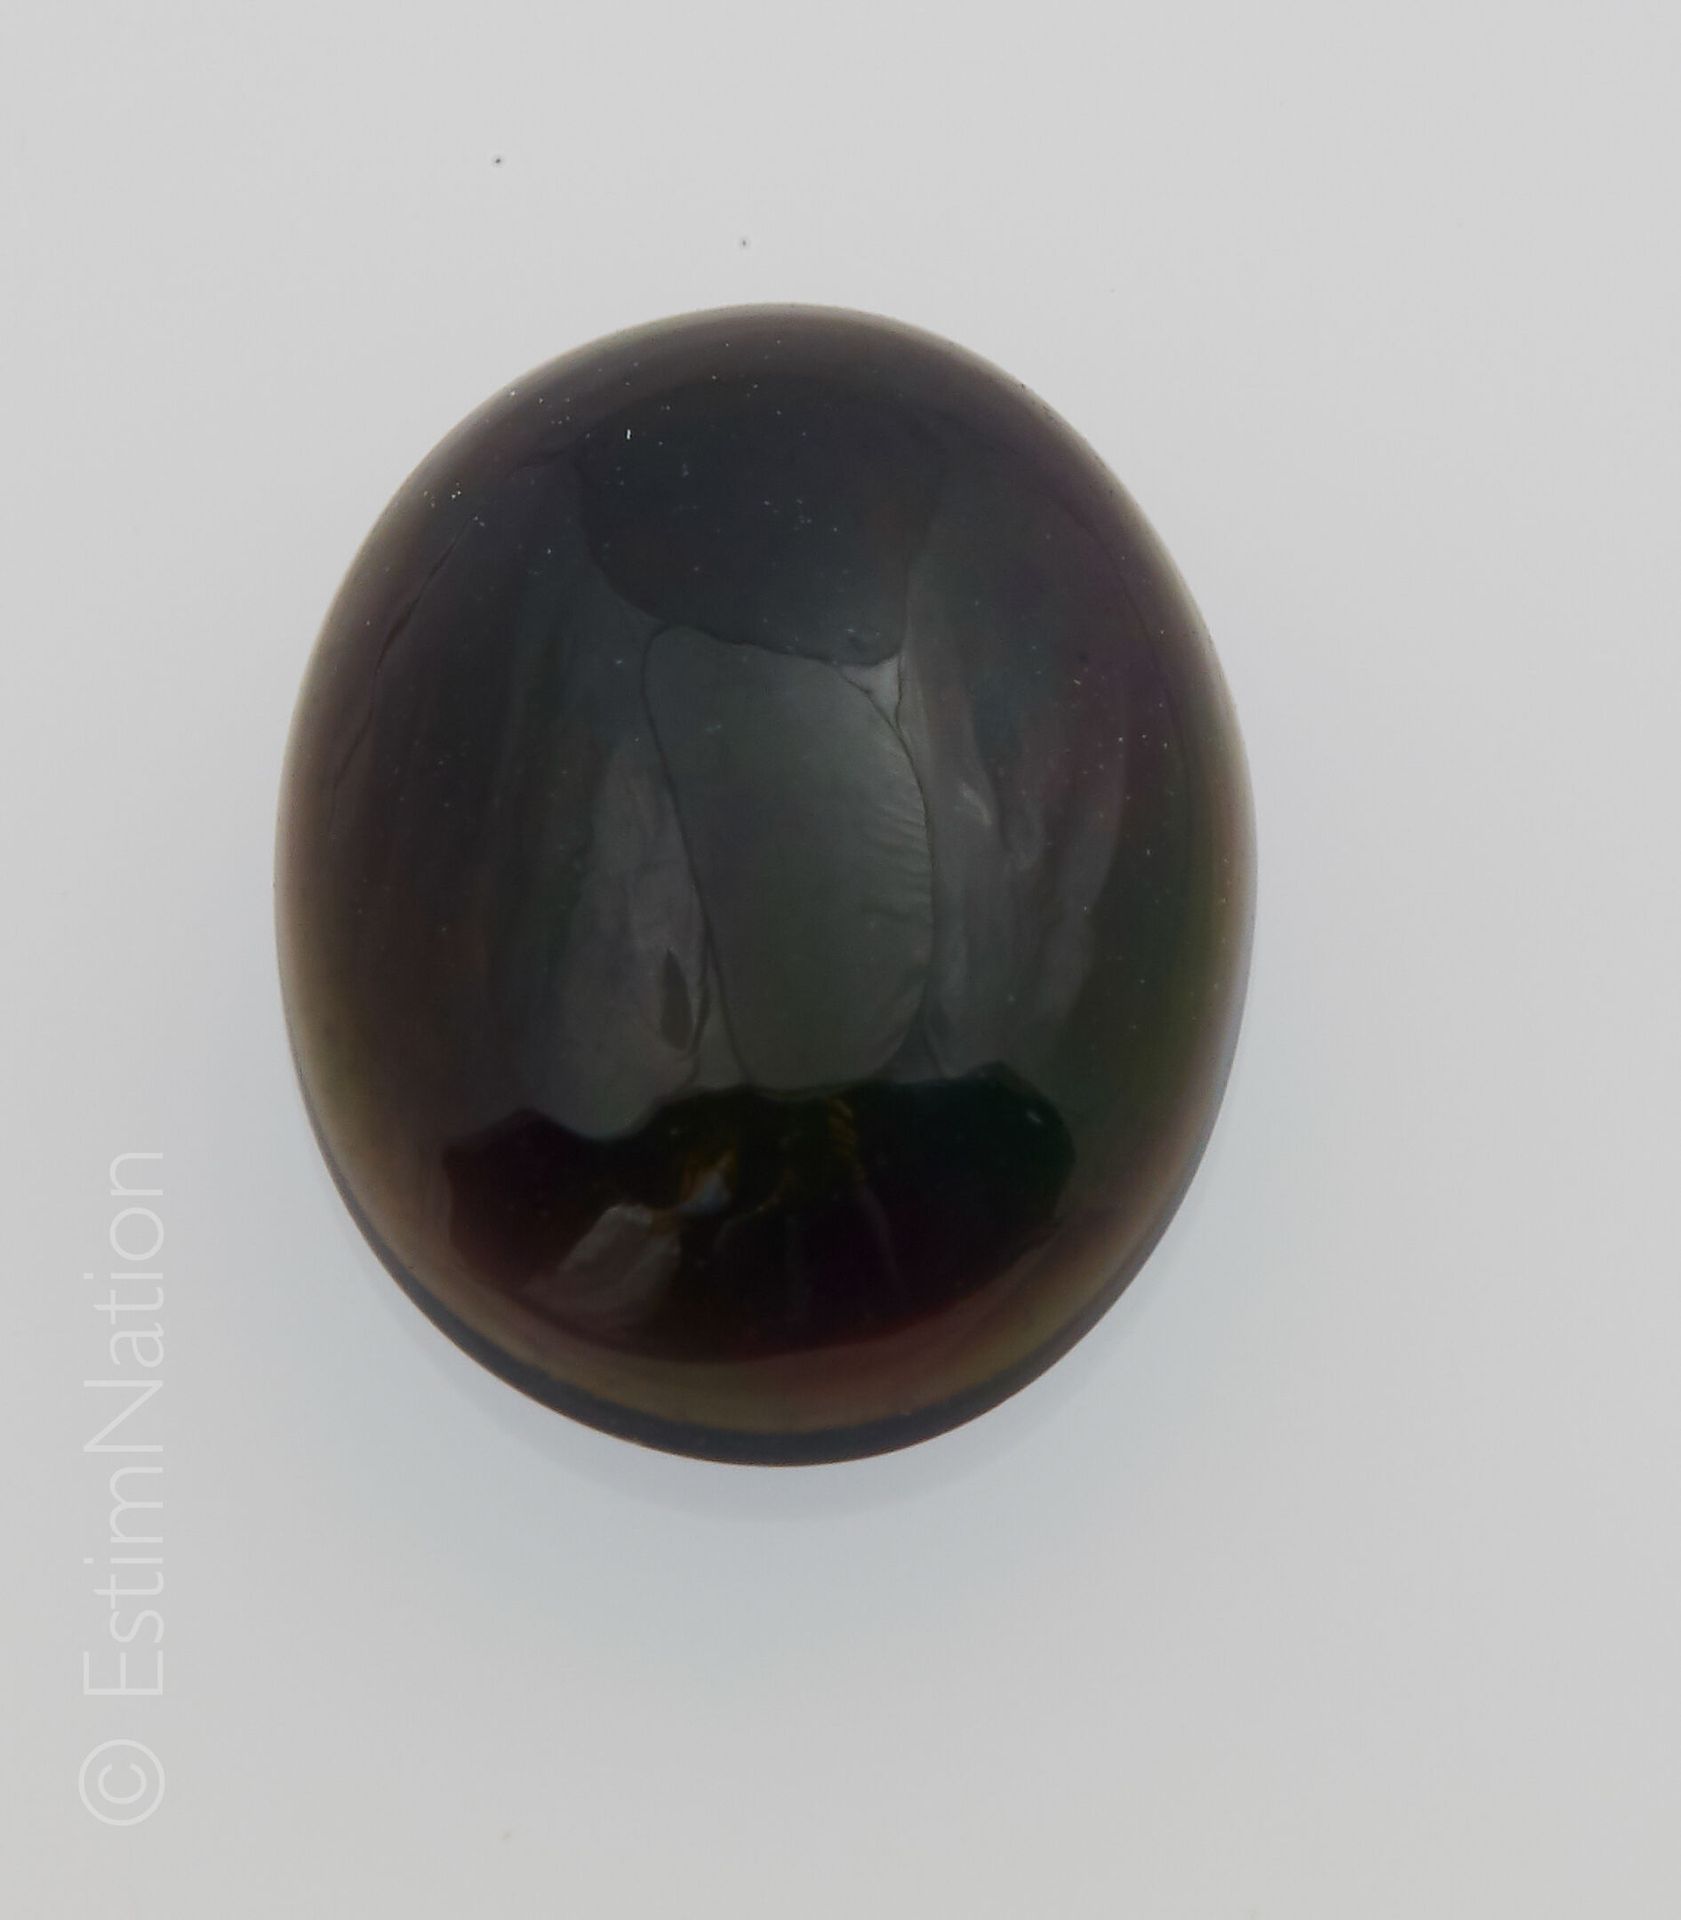 OPALE NOIRE 1.24 CARAT Black opal oval cabochon weighing approximately 1.24 ct

&hellip;